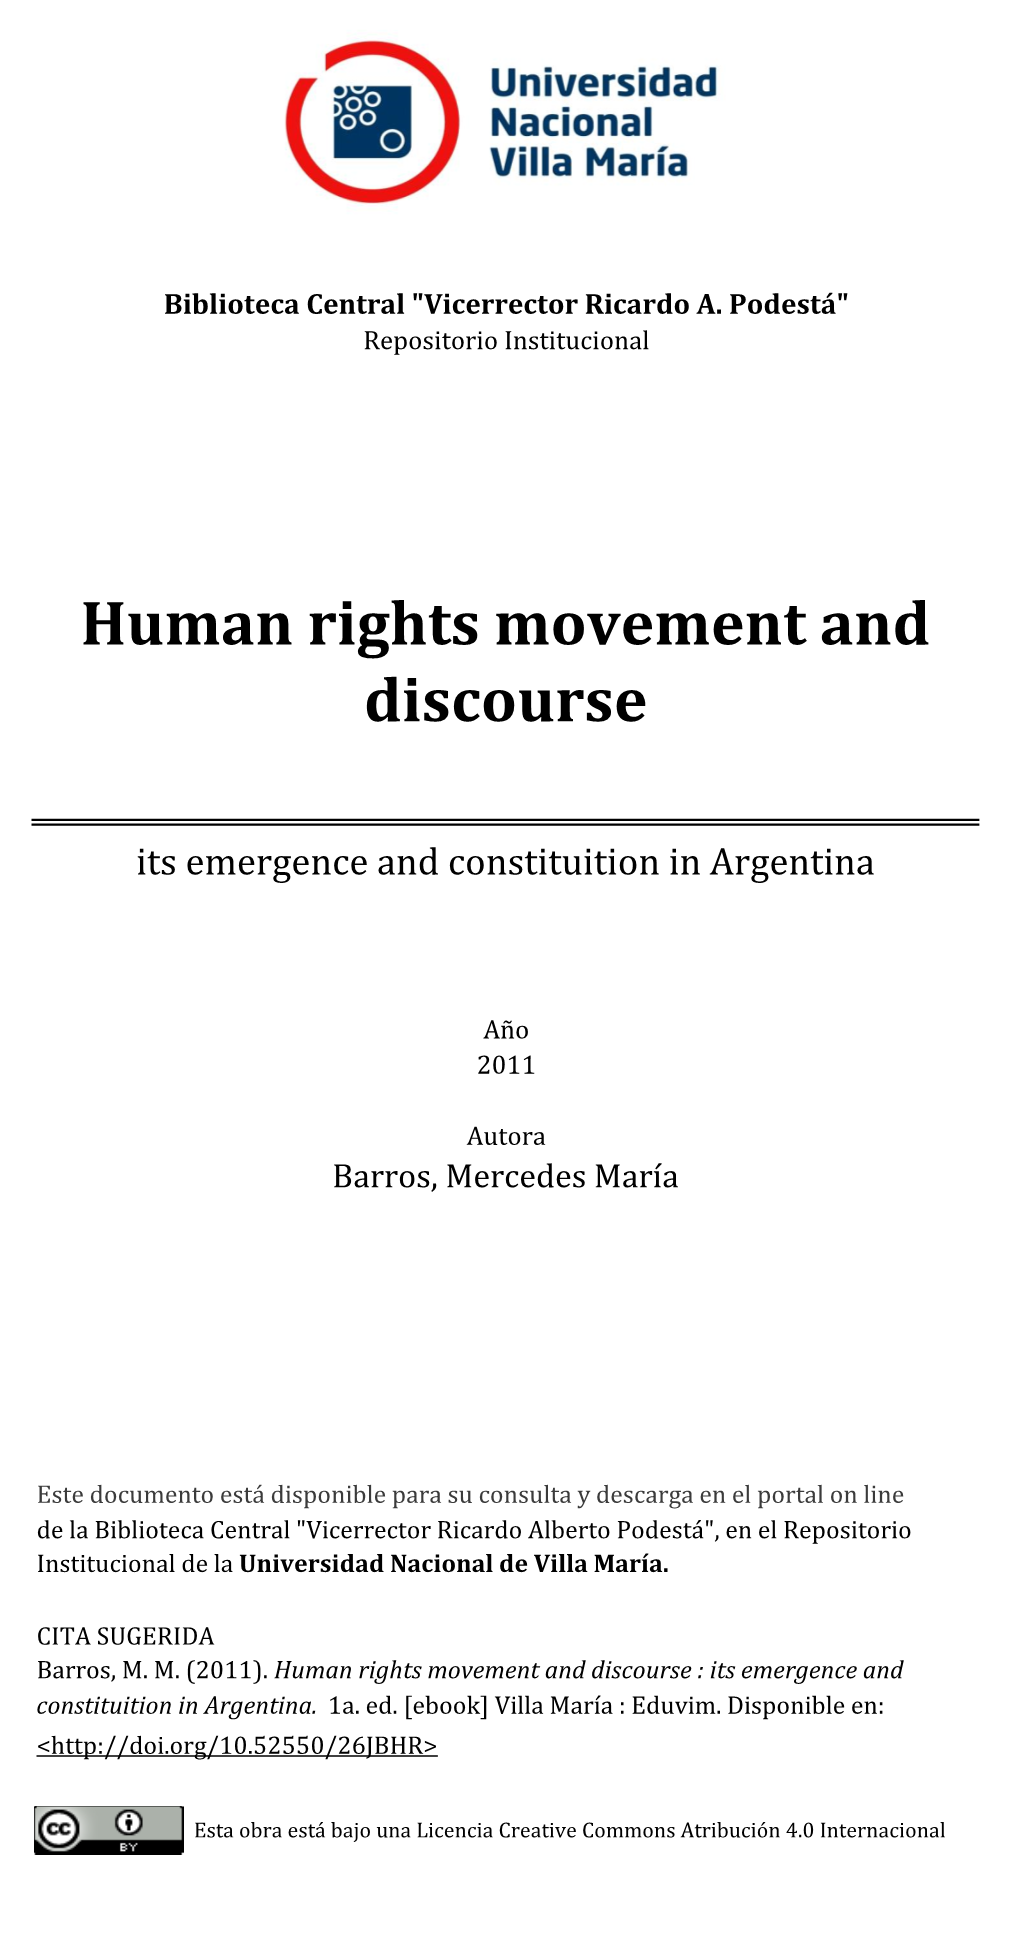 Human Rights Movement and Discourse